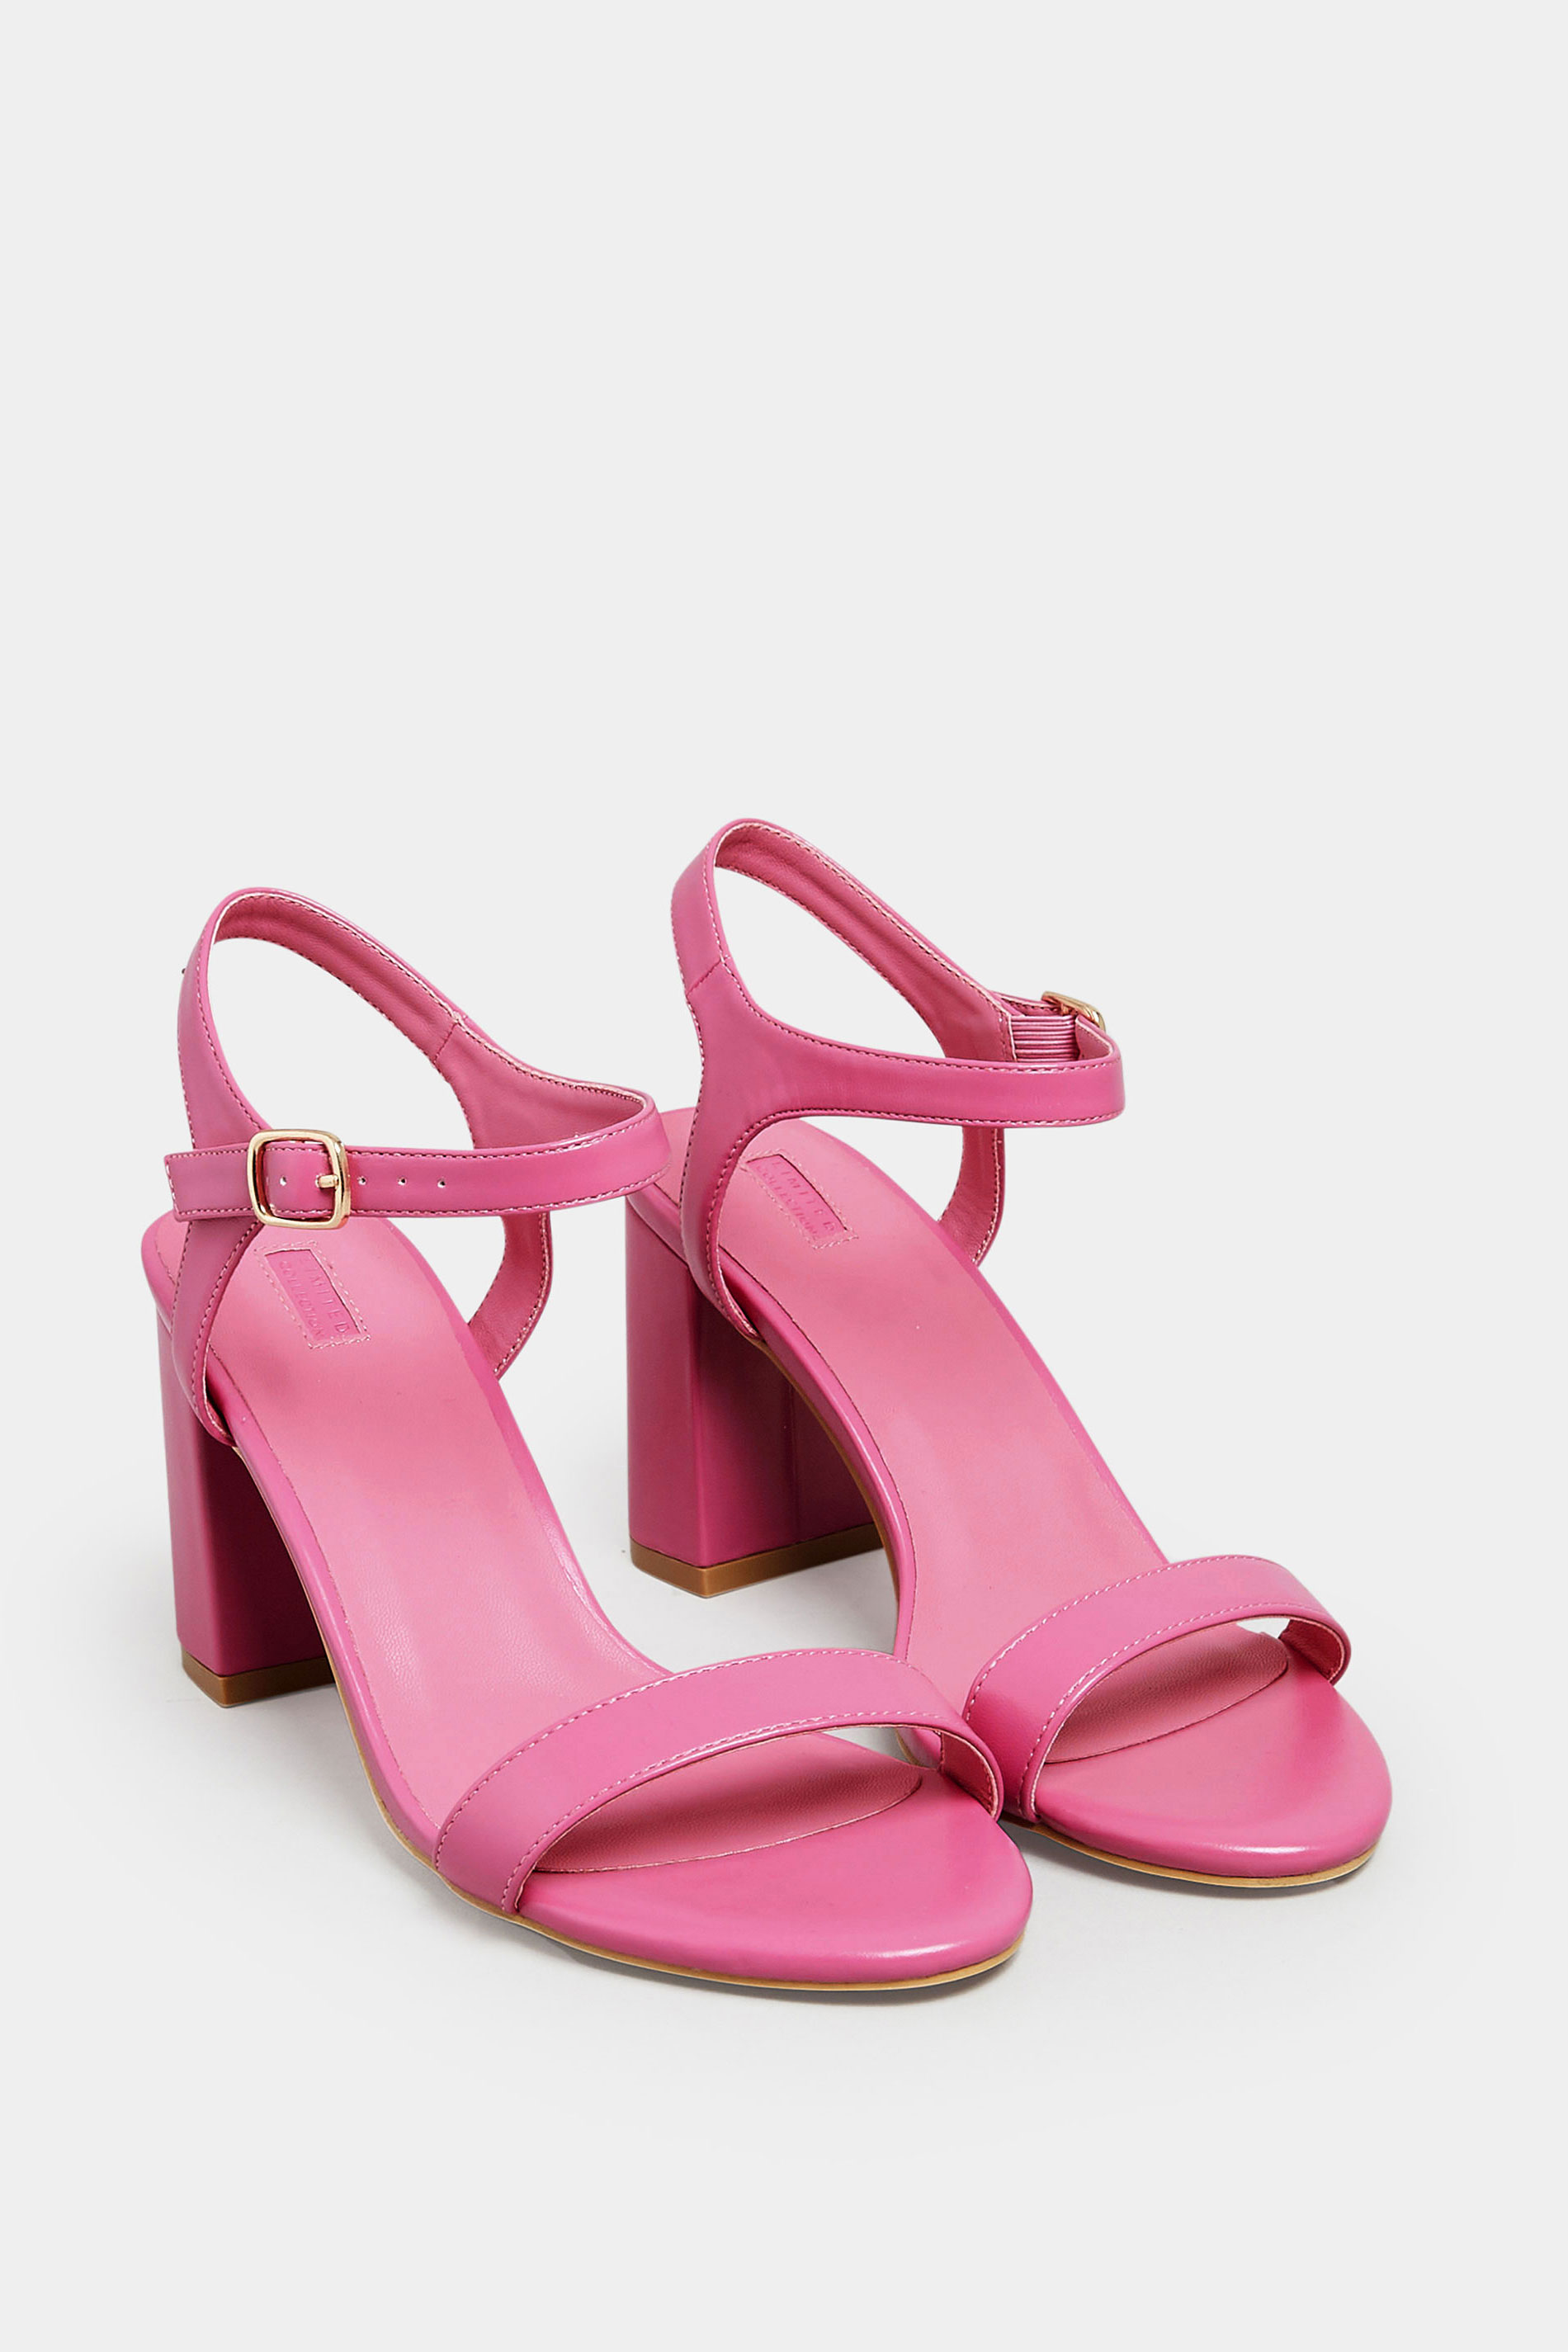 LIMITED COLLECTION Pink Block Heel Sandal In Wide E Fit & Extra Wide Fit | Yours Clothing 2